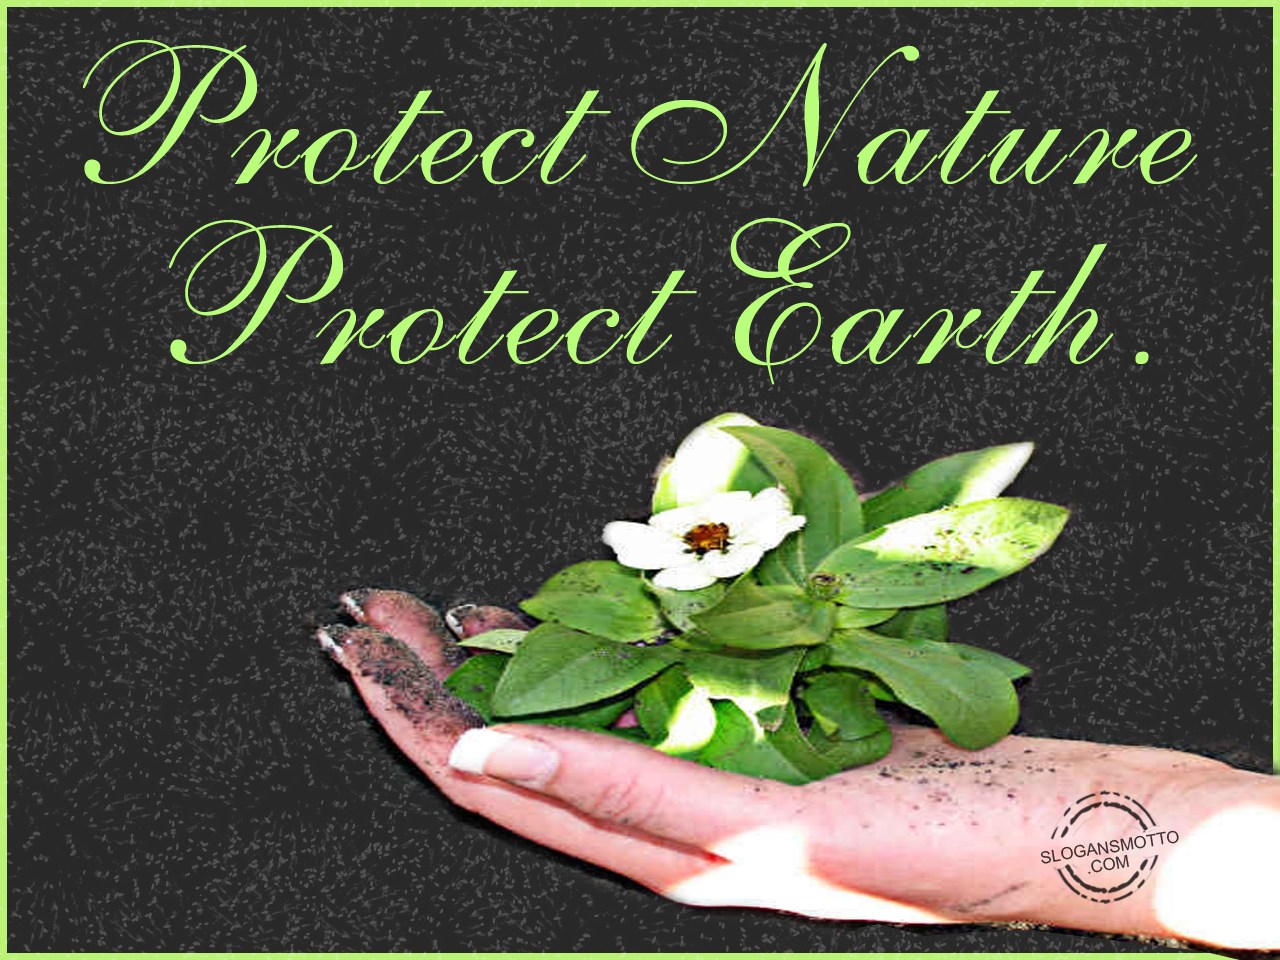 Earth Protection Poster With Slogan - The Earth Images Revimage.Org